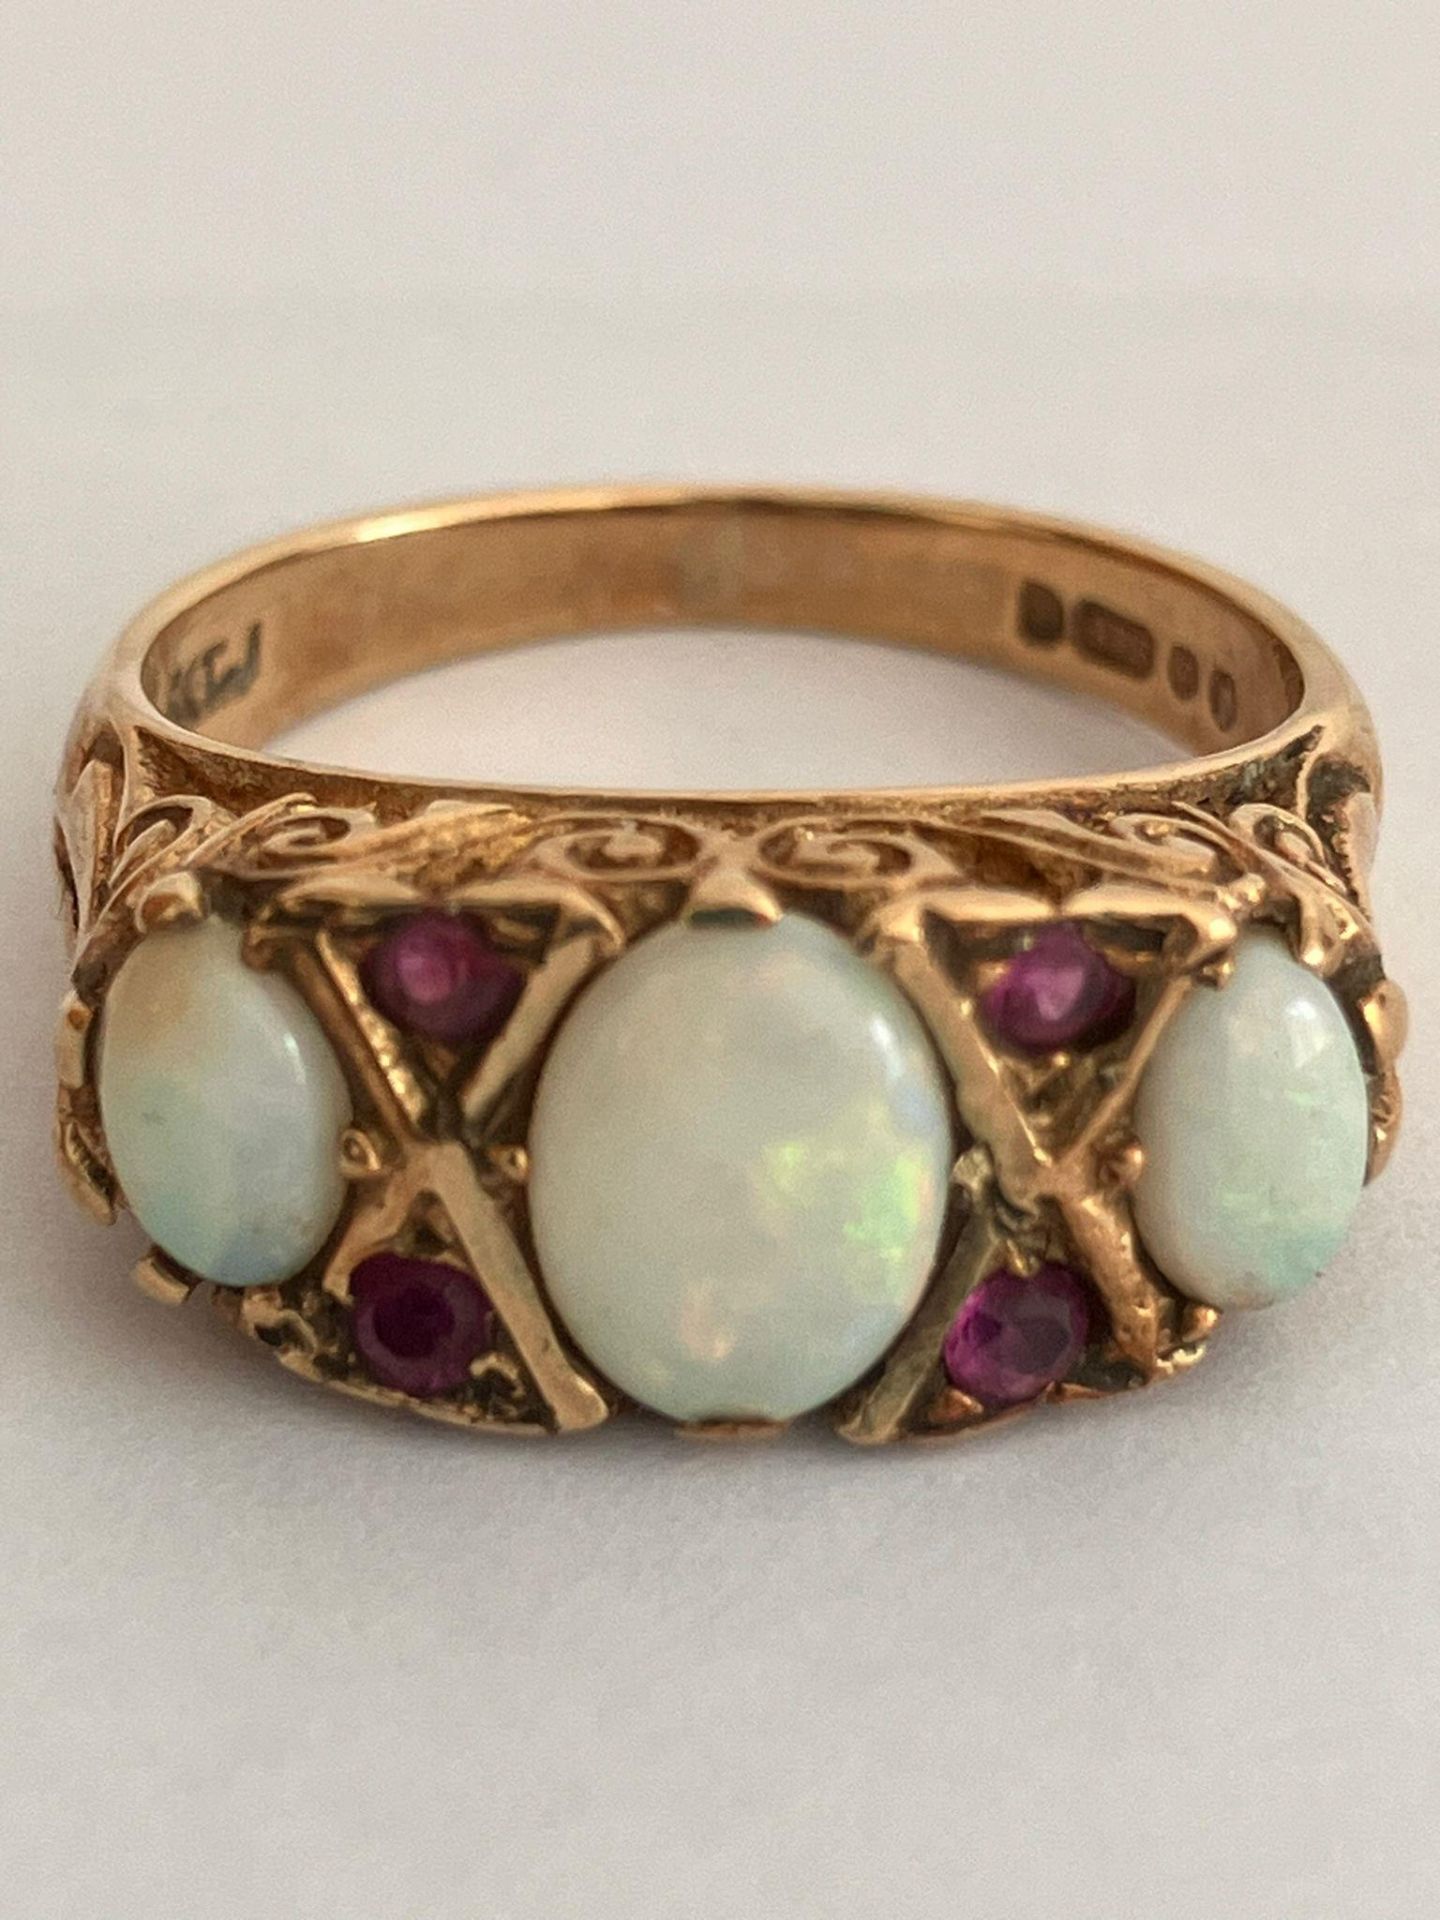 Vintage 9 carat YELLOW GOLD,OPAL and RUBY RING. Full UK hallmark. Complete with jewellers vintage